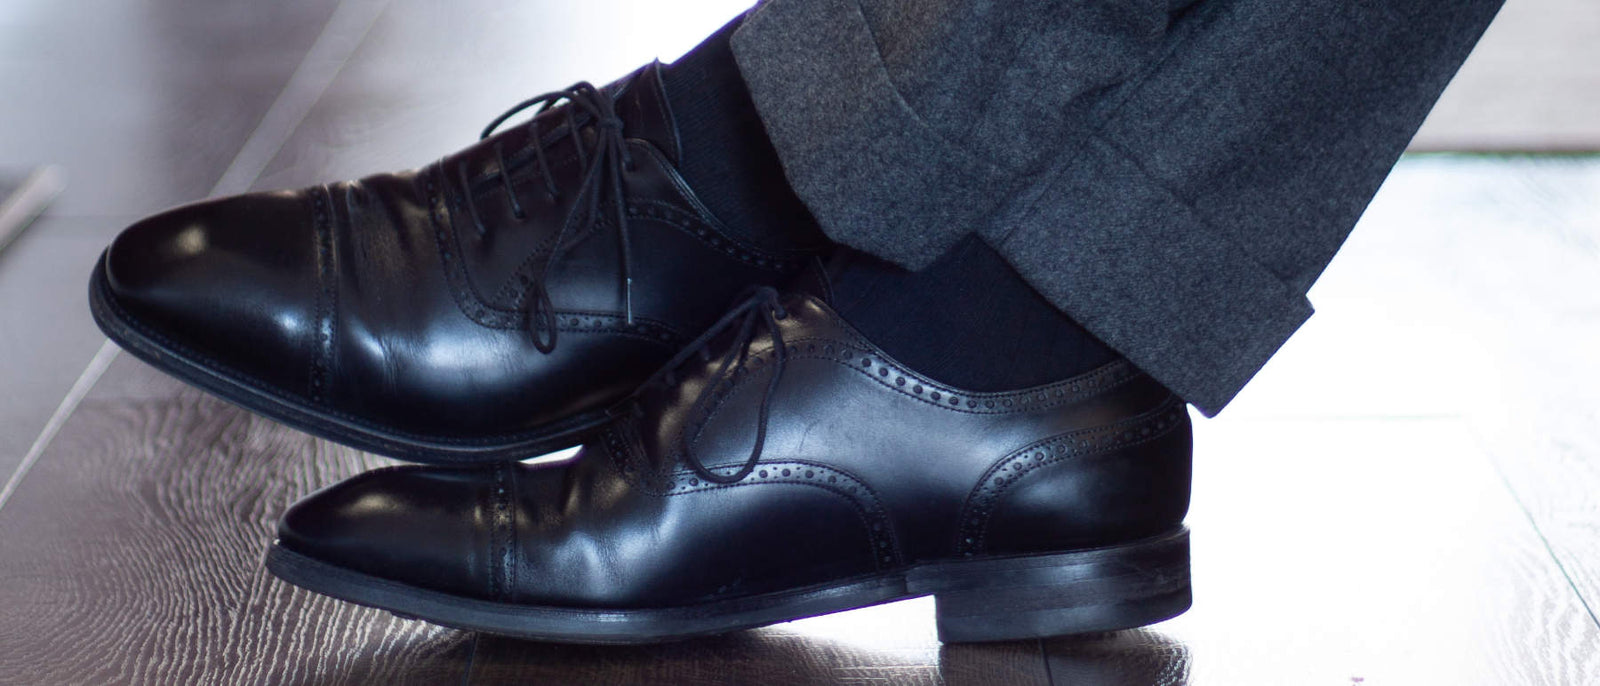 The Boardroom Socks Guide to Black Dress Shoes